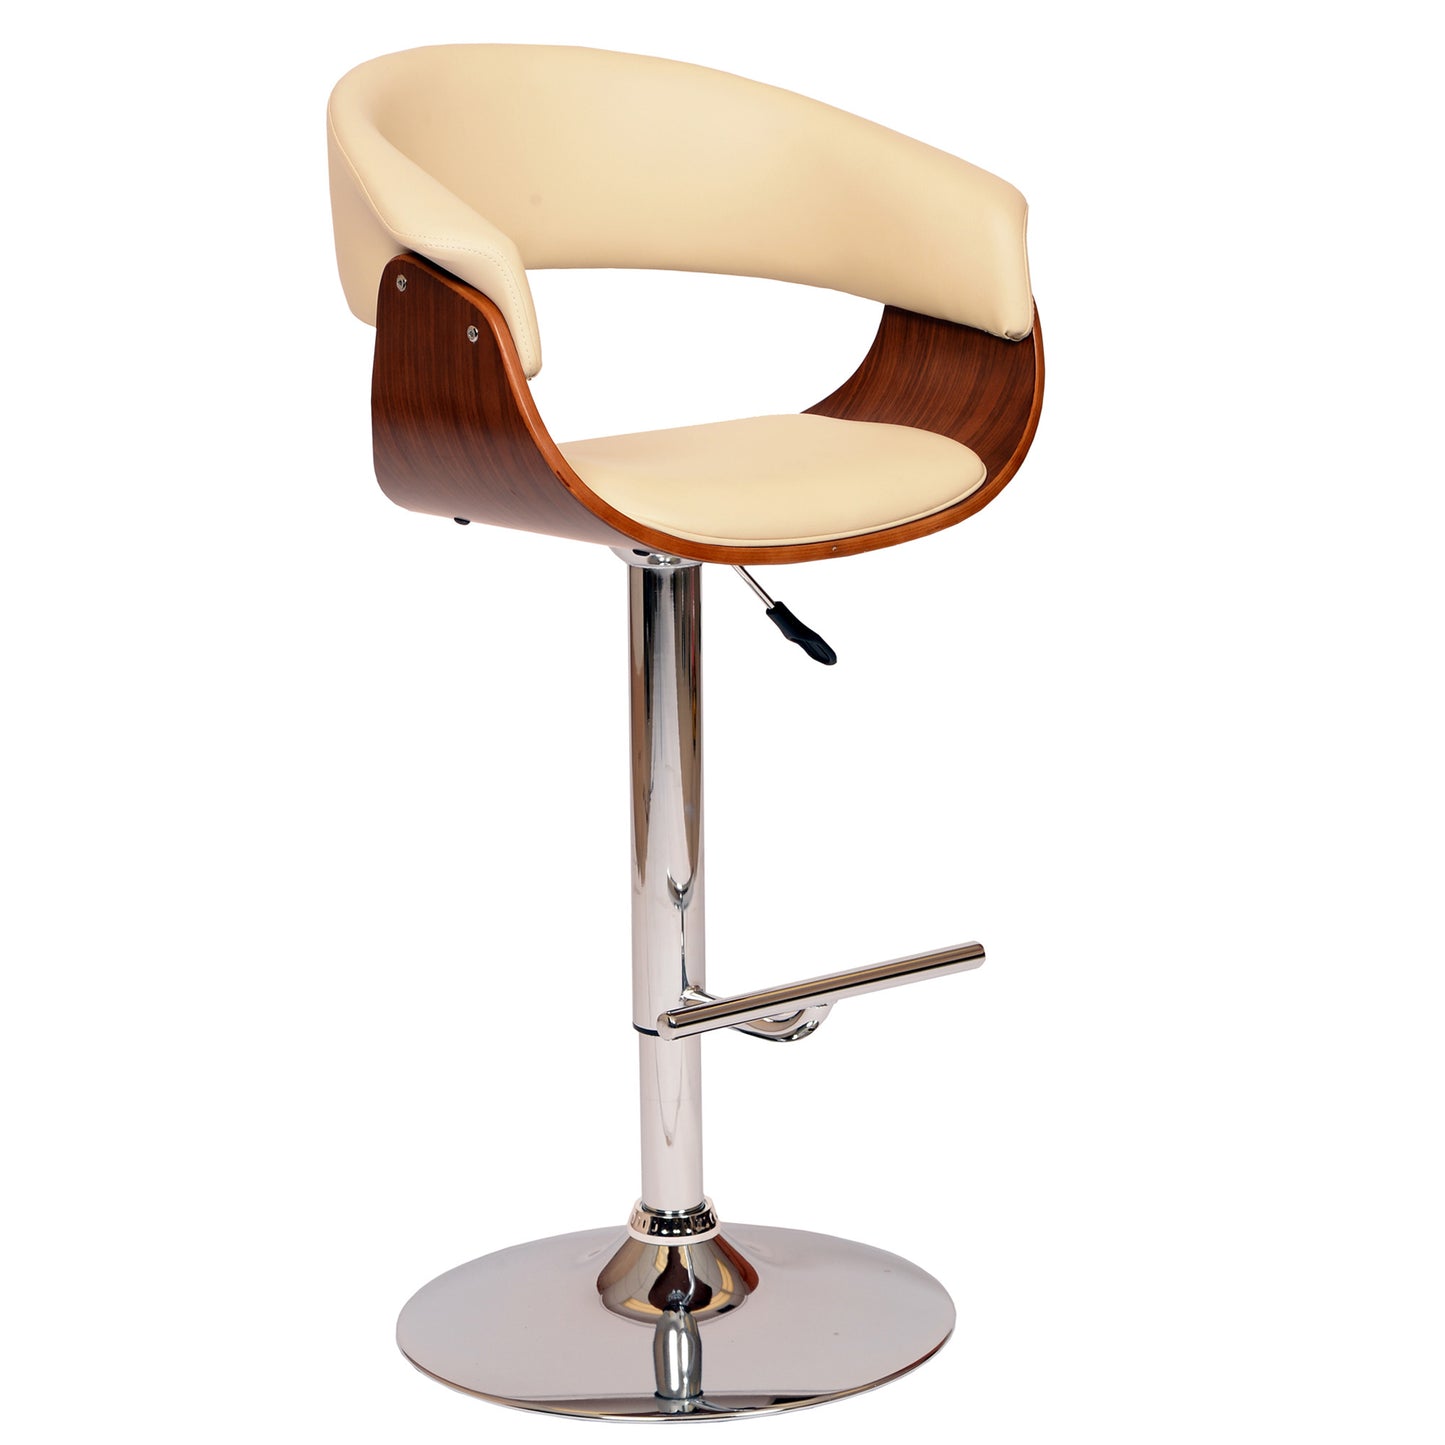 44" Cream And Silver Faux Leather And Solid Wood Swivel Low Back Adjustable Height Bar Chair With Footrest By Homeroots